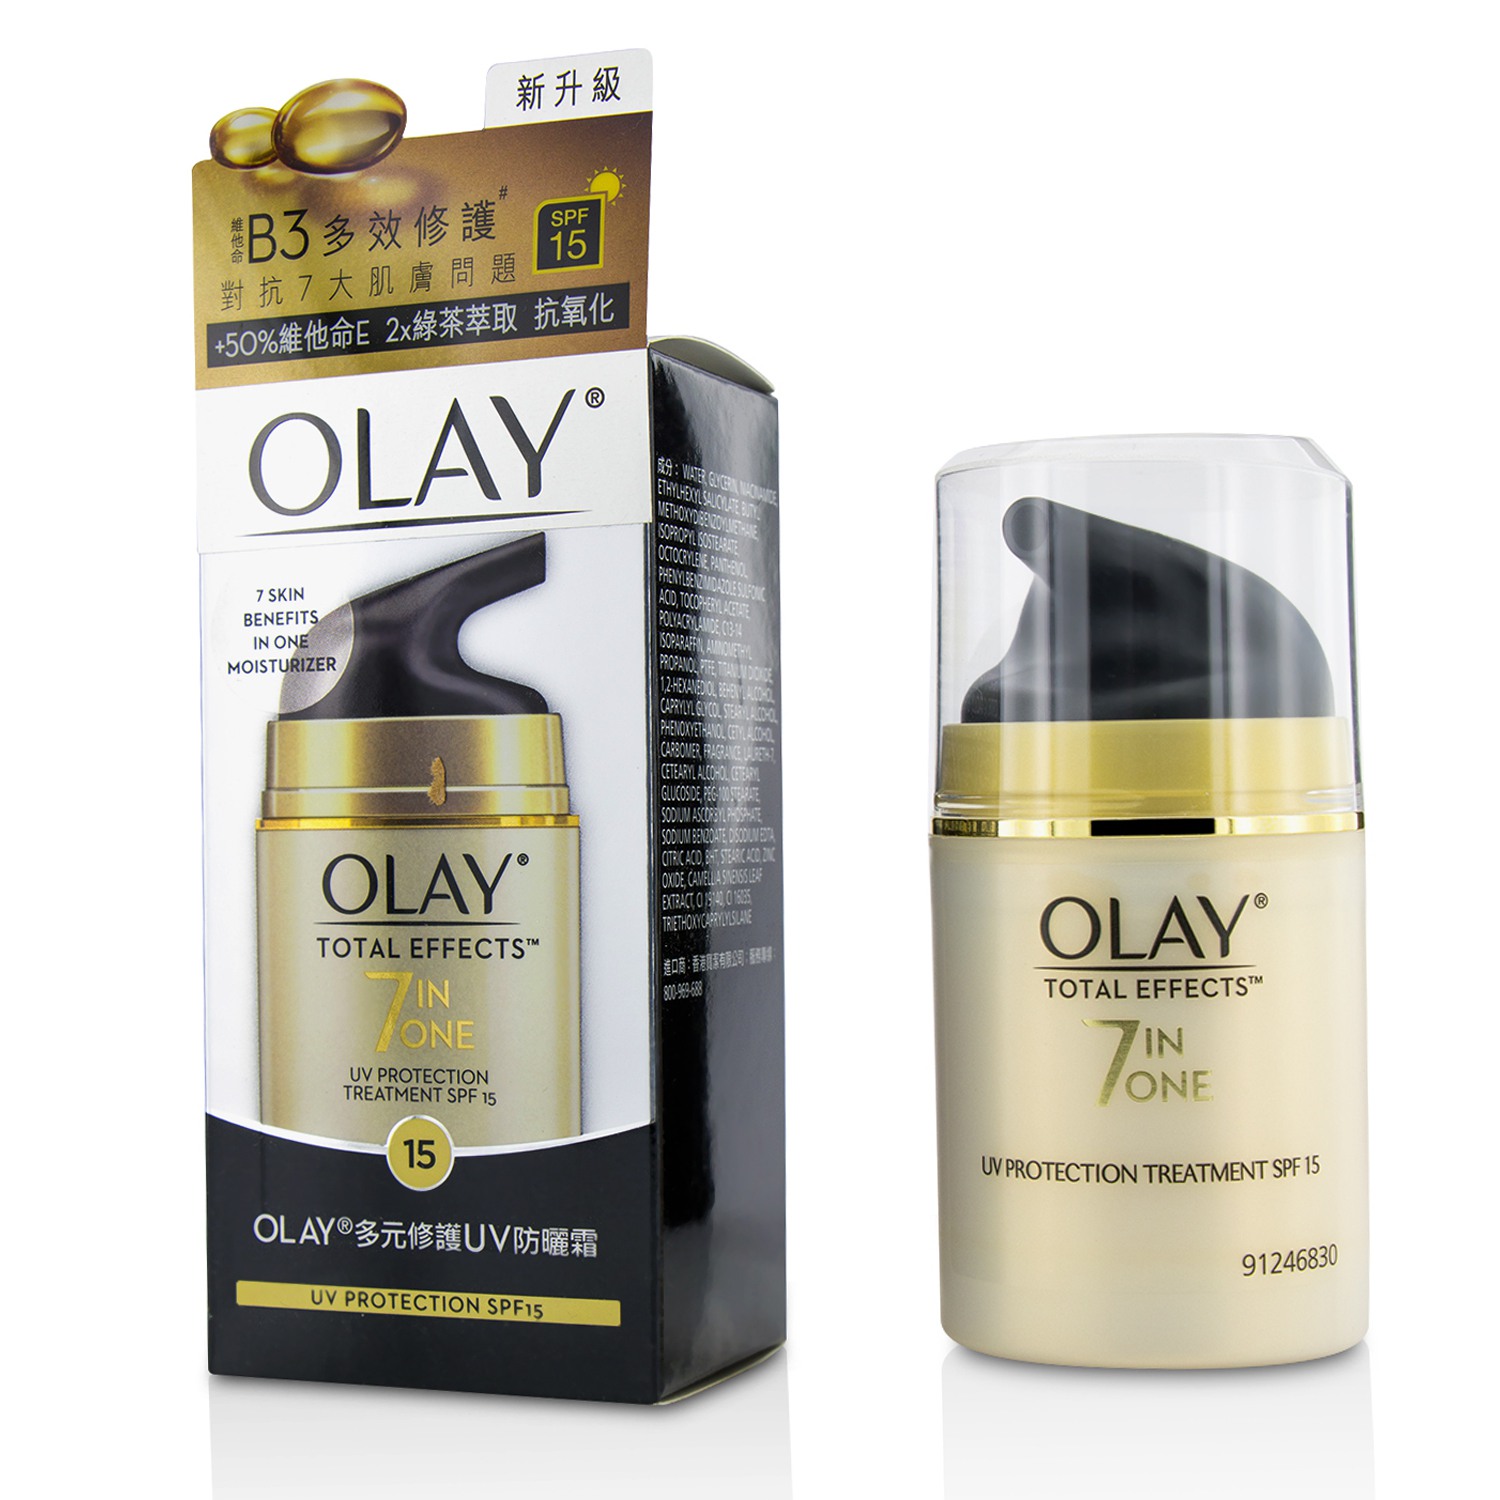 Total Effects 7 in 1 UV Protection Treatment SPF15 Olay Image